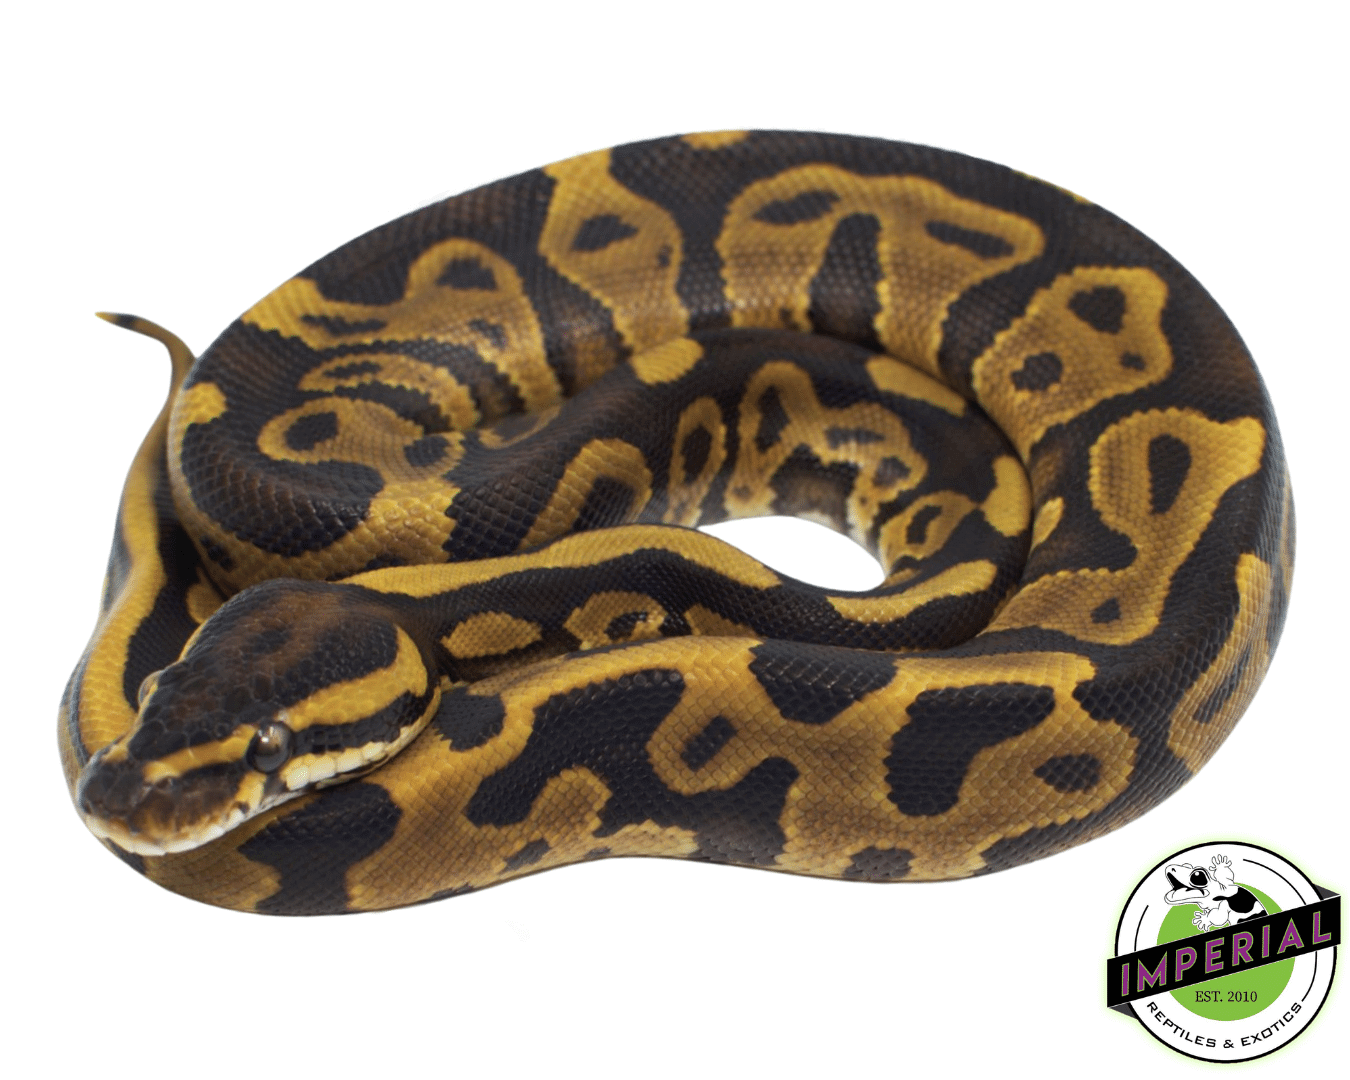 leopard ball python for sale online, buy leopard ball pythons near me at cheap price